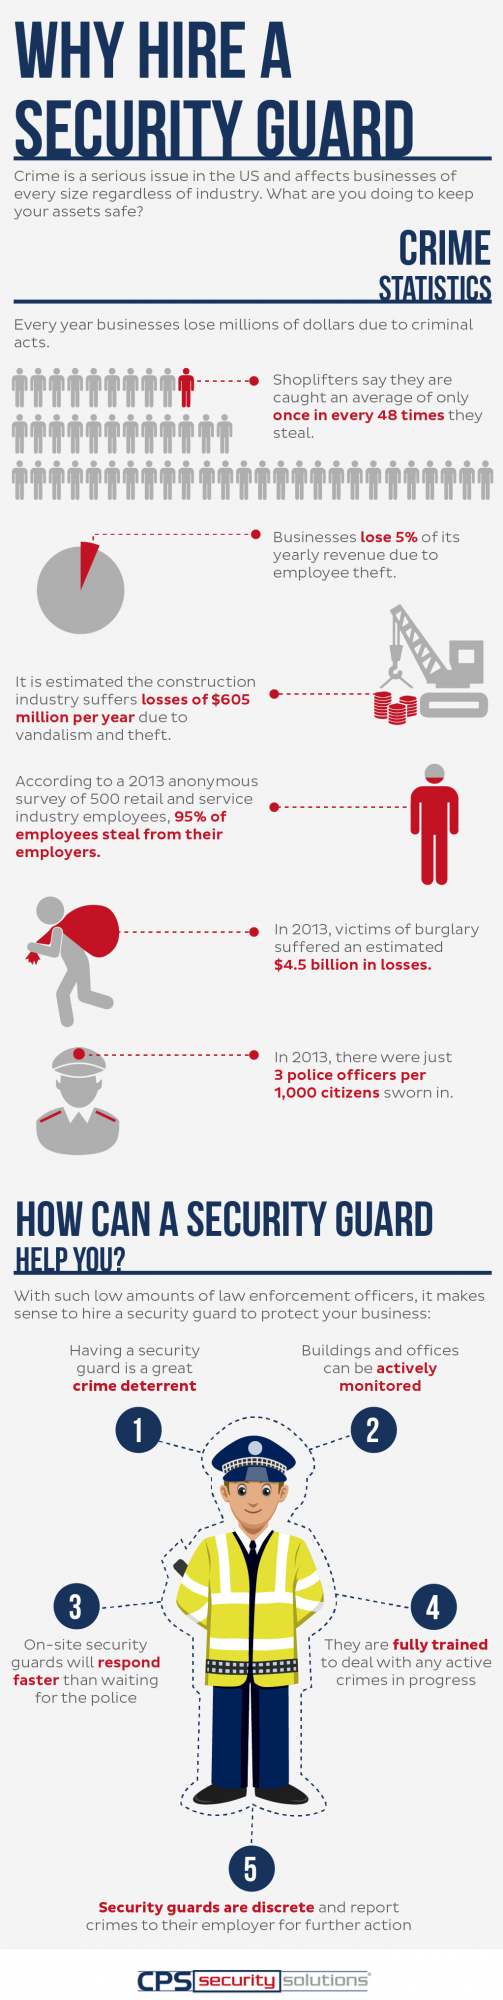 Why Hire a Security Guard infographic